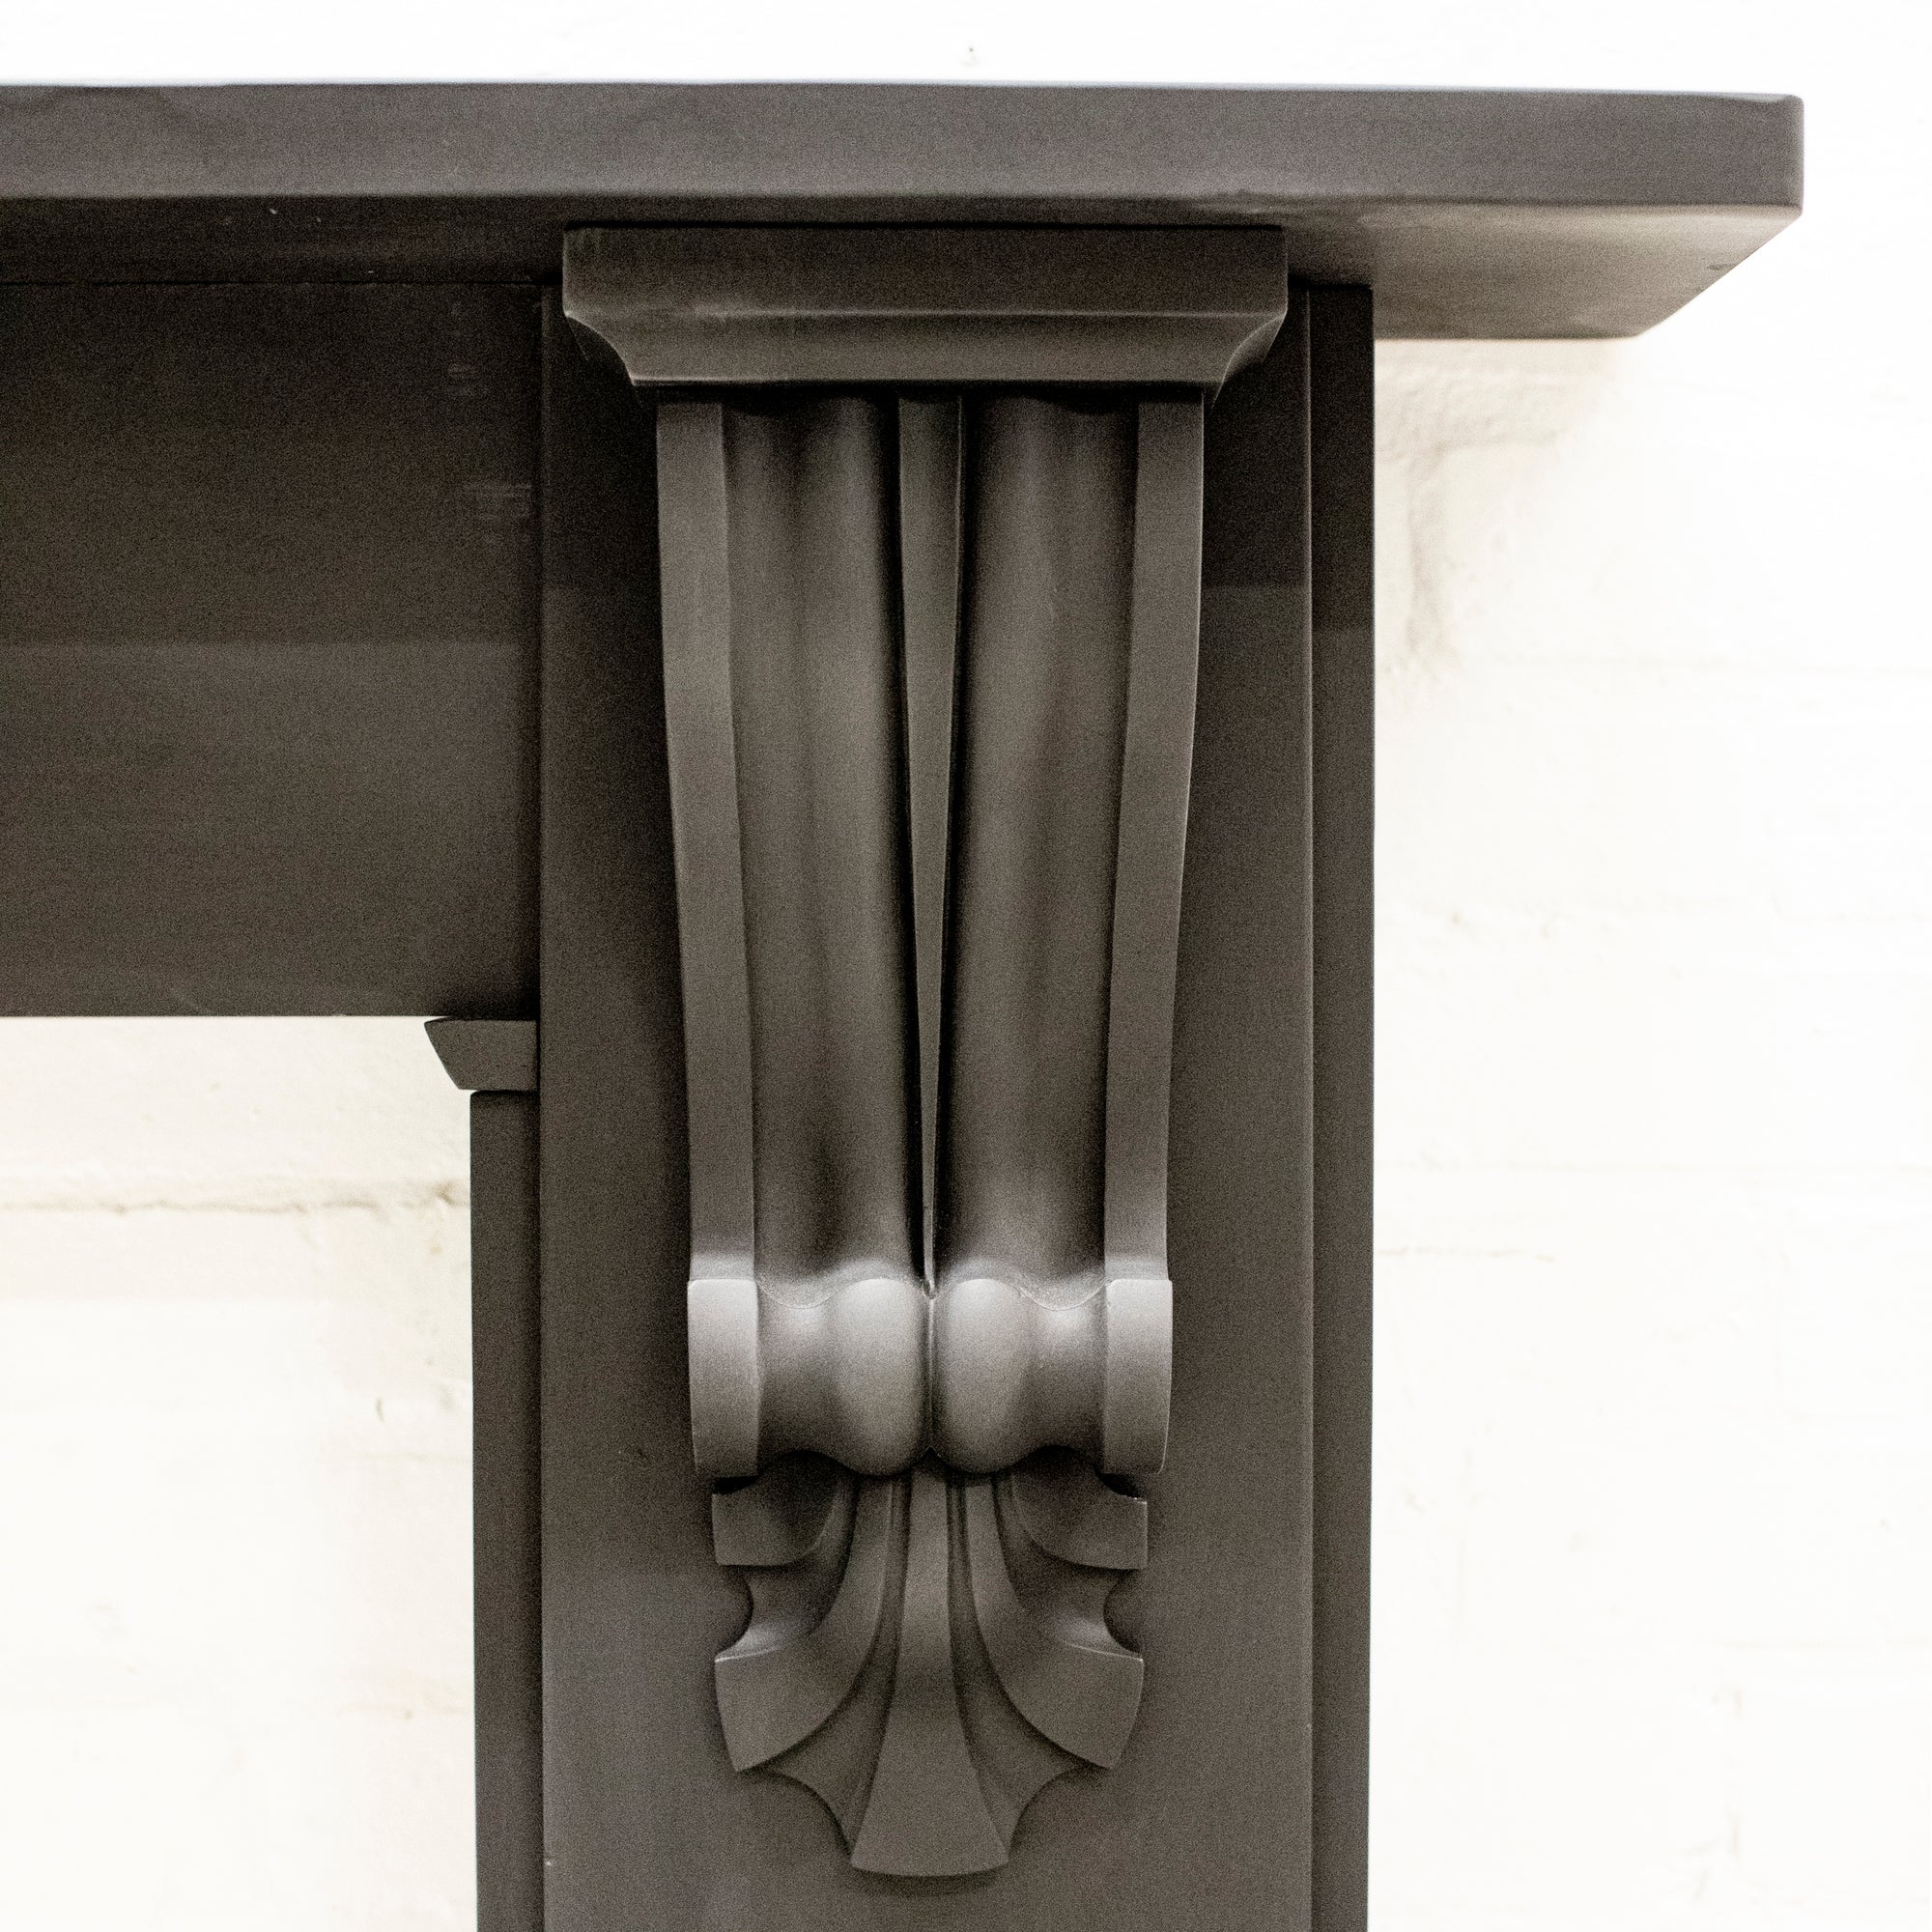 Slate Antique Fireplace Surround With Corbels | The Architectural Forum